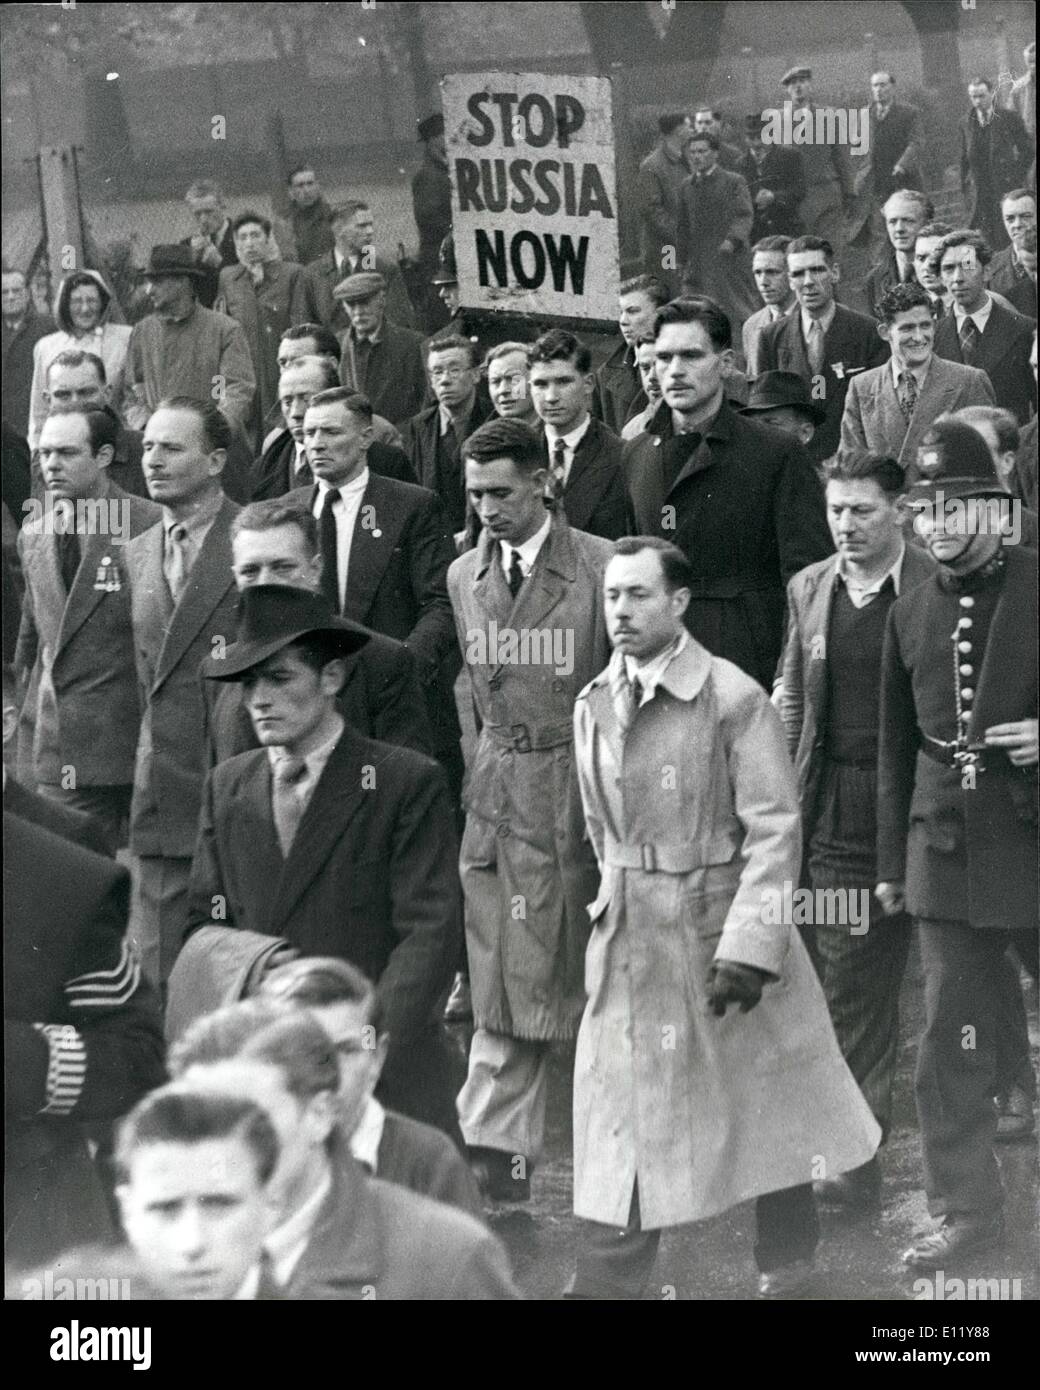 Dec. 12, 1980 - Sir Oswa;d Mosley Died in Paris - Sir Oswald Mosley, one time leader of the British Poscist Movement, Died Early today at his home in Paris. he was 84. Photo Shows:- Sir OswaldMosley with his followers during a demonstration in London in the 1930's/ Stock Photo